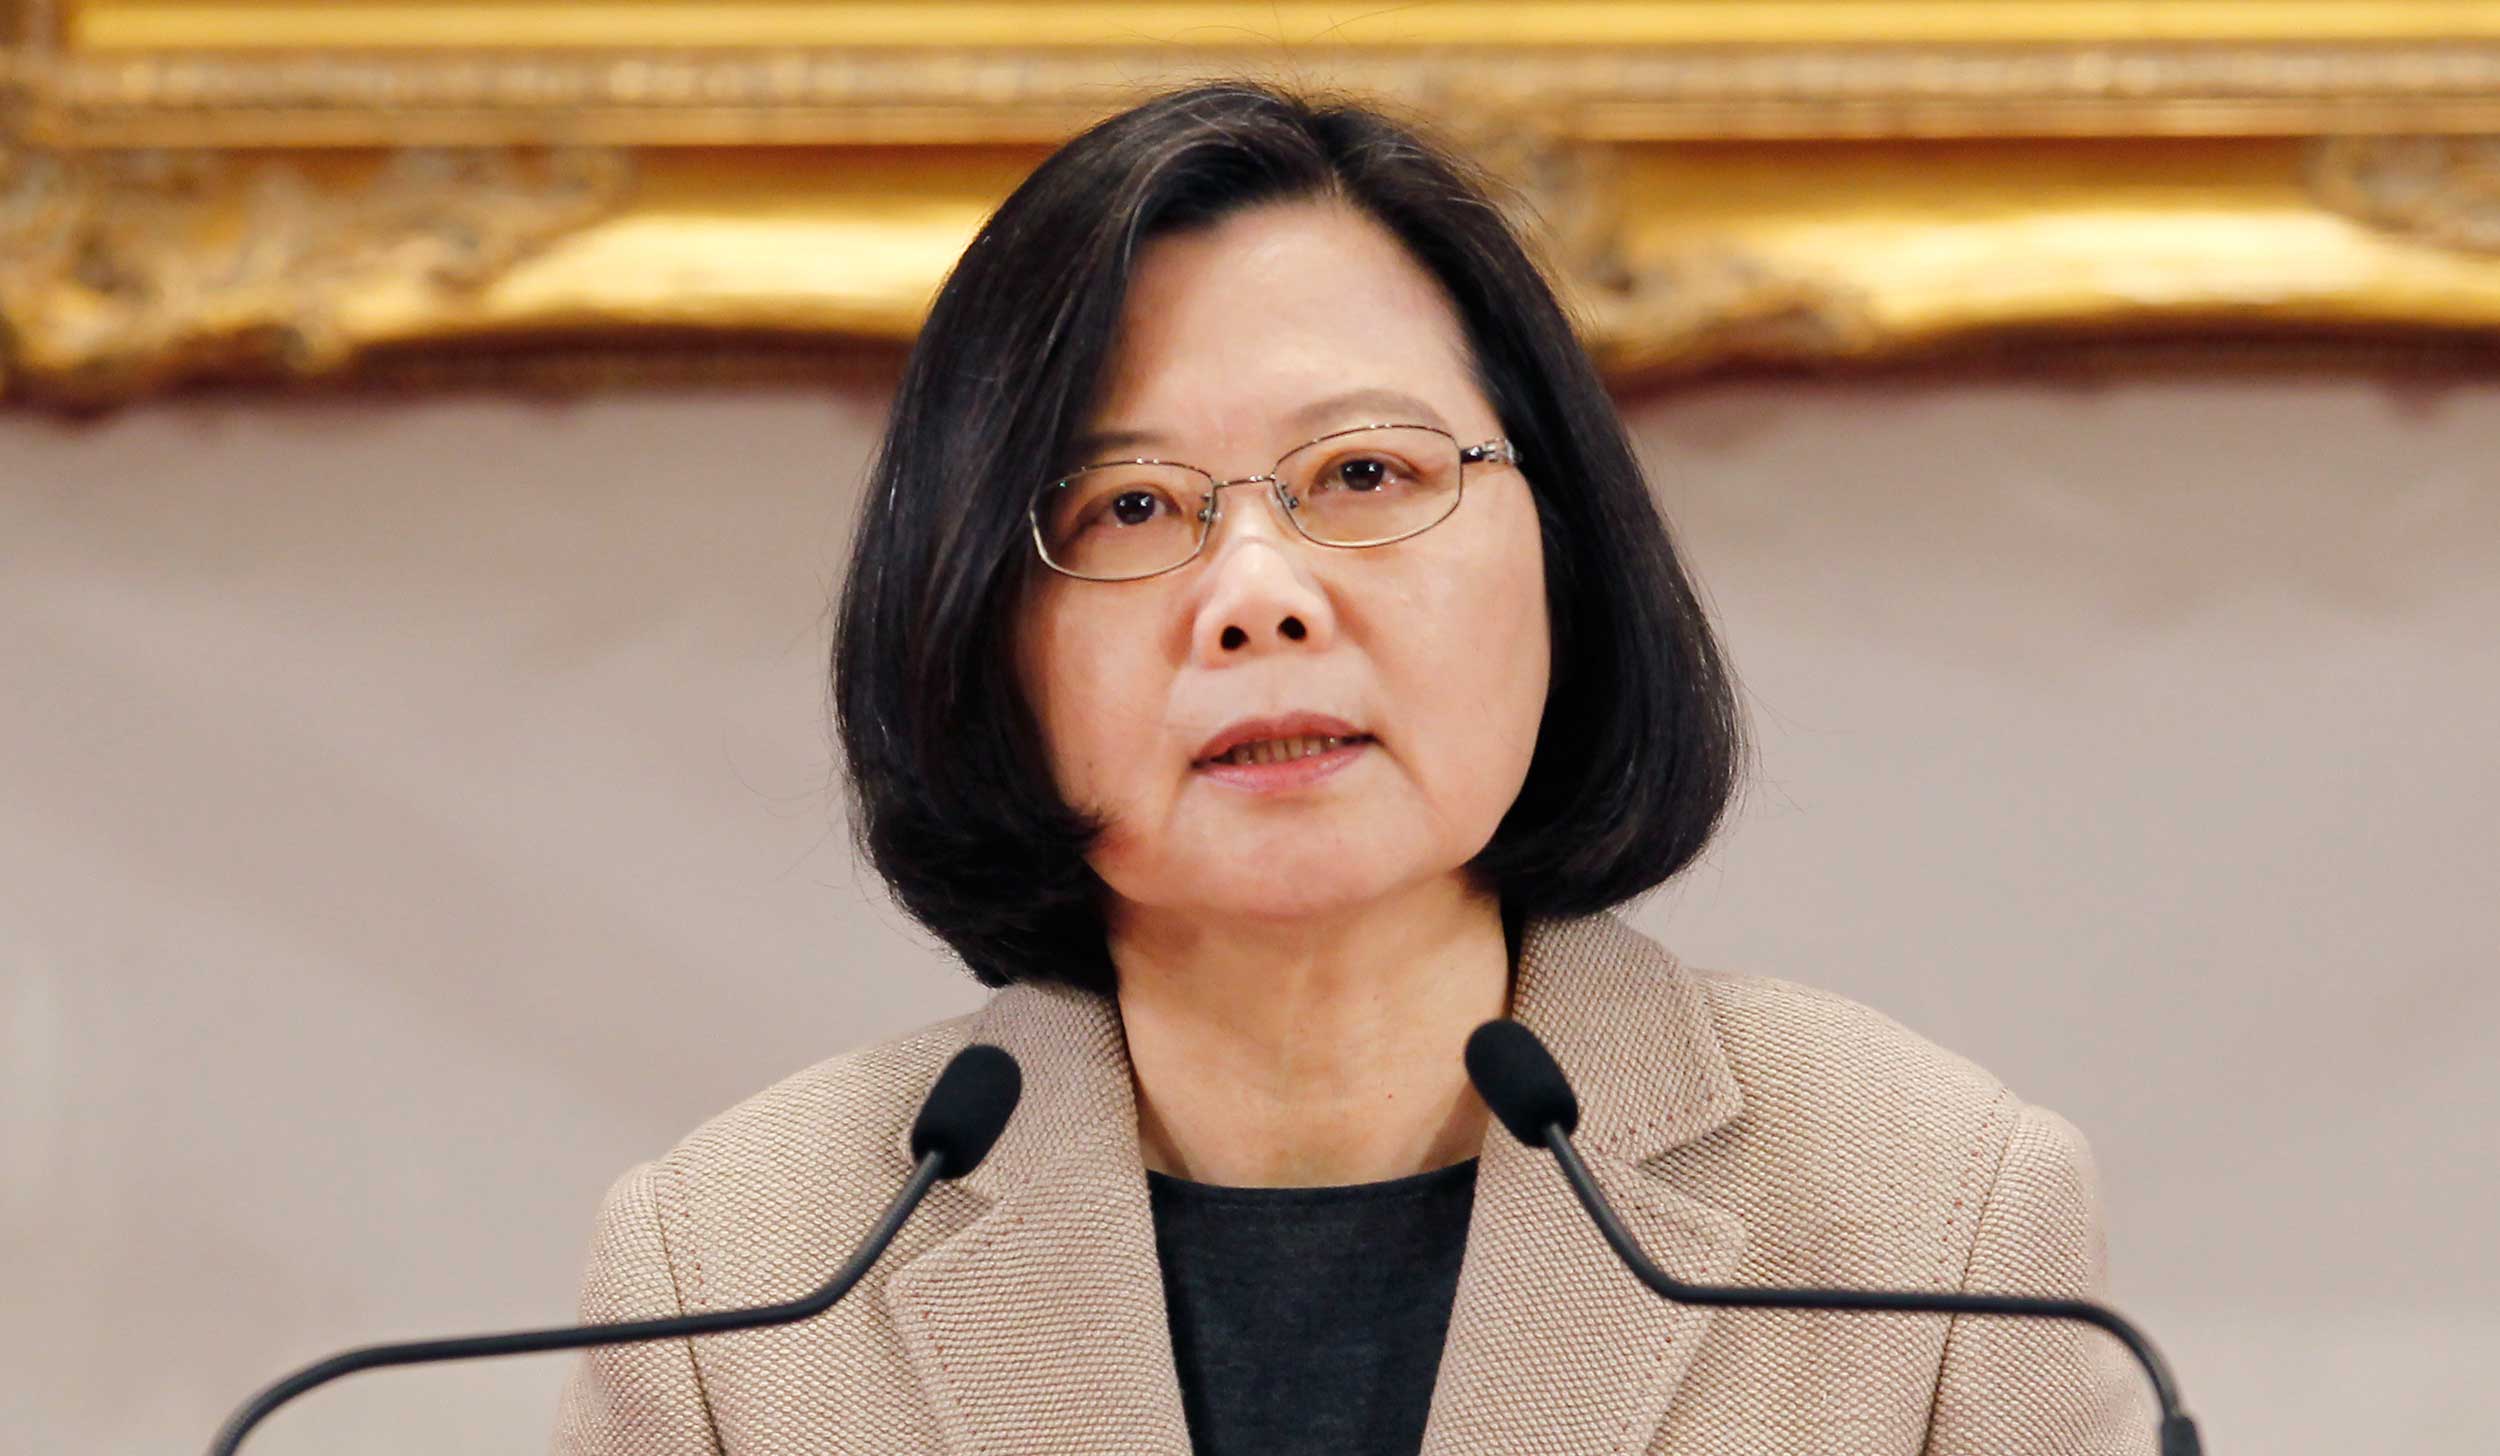 Taiwanese President Tsai Ing-wen delivers a speech during the New Year press conference in Taipei, Taiwan, on Tuesday, January 1, 2019.